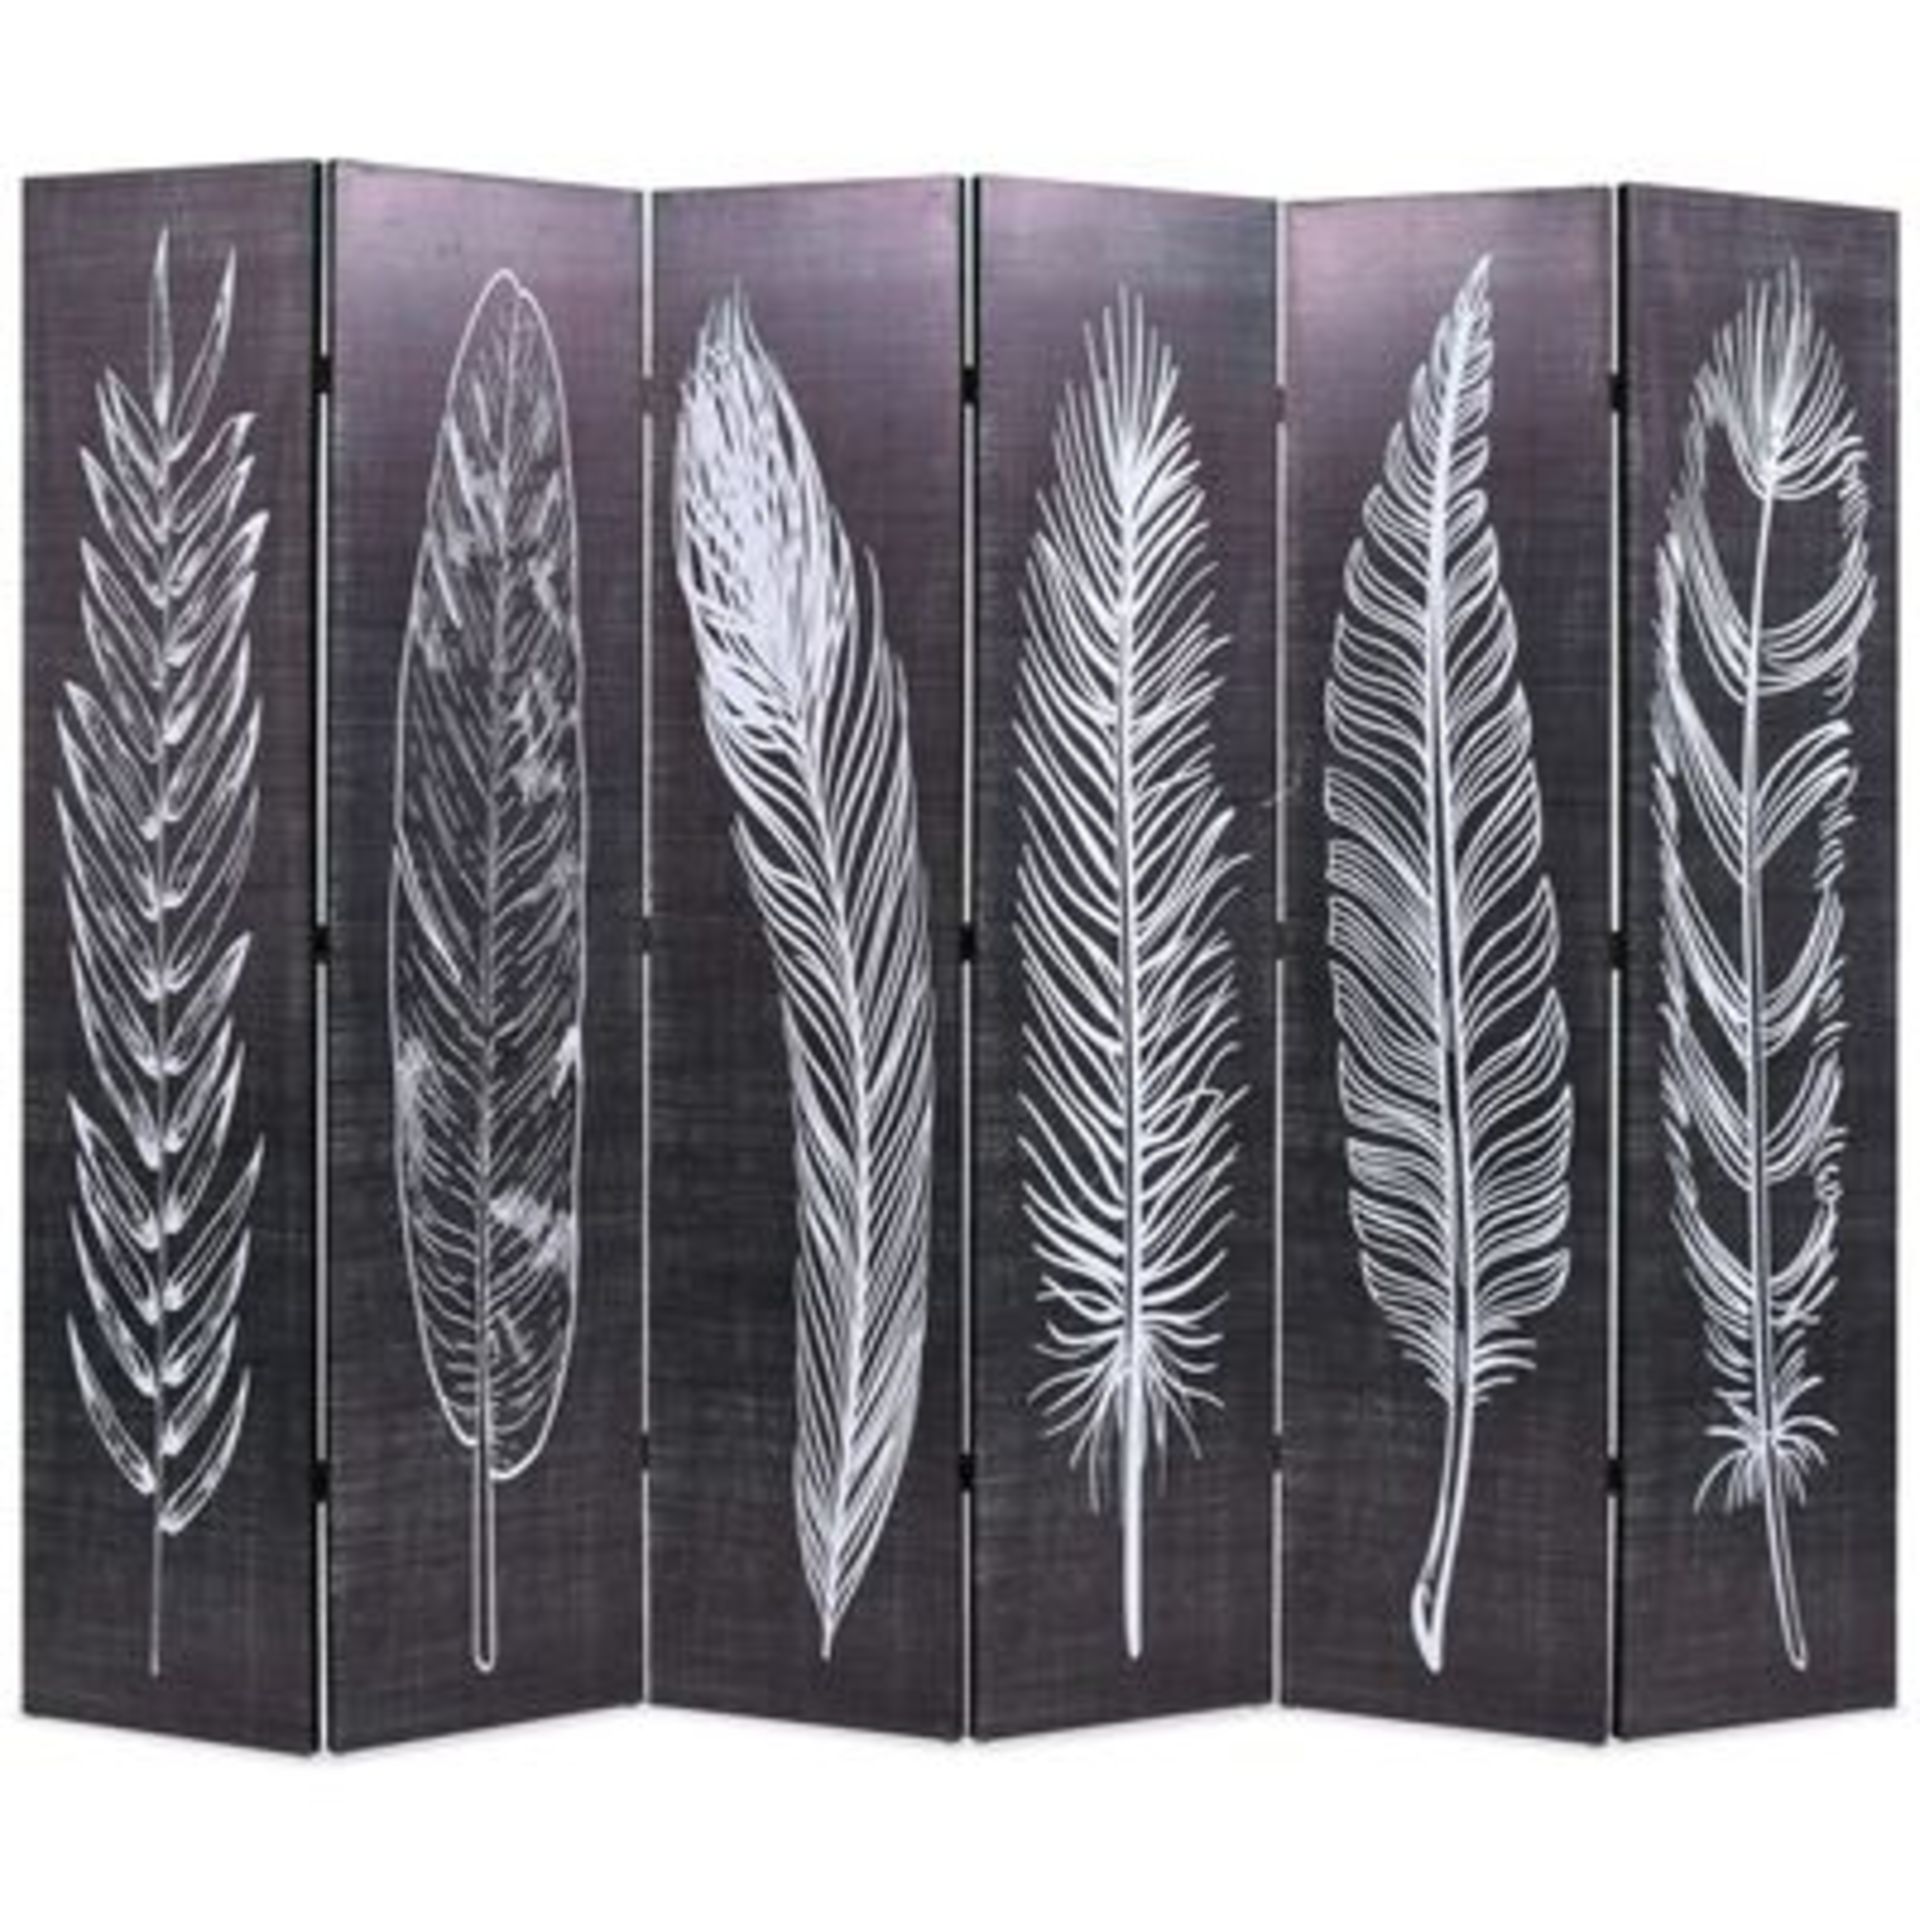 BOXED HERNDON 4 PANEL ROOM DIVIDER VDAX5035 RRP £111.99 (AS SEEN IN WAYFAIR)Condition